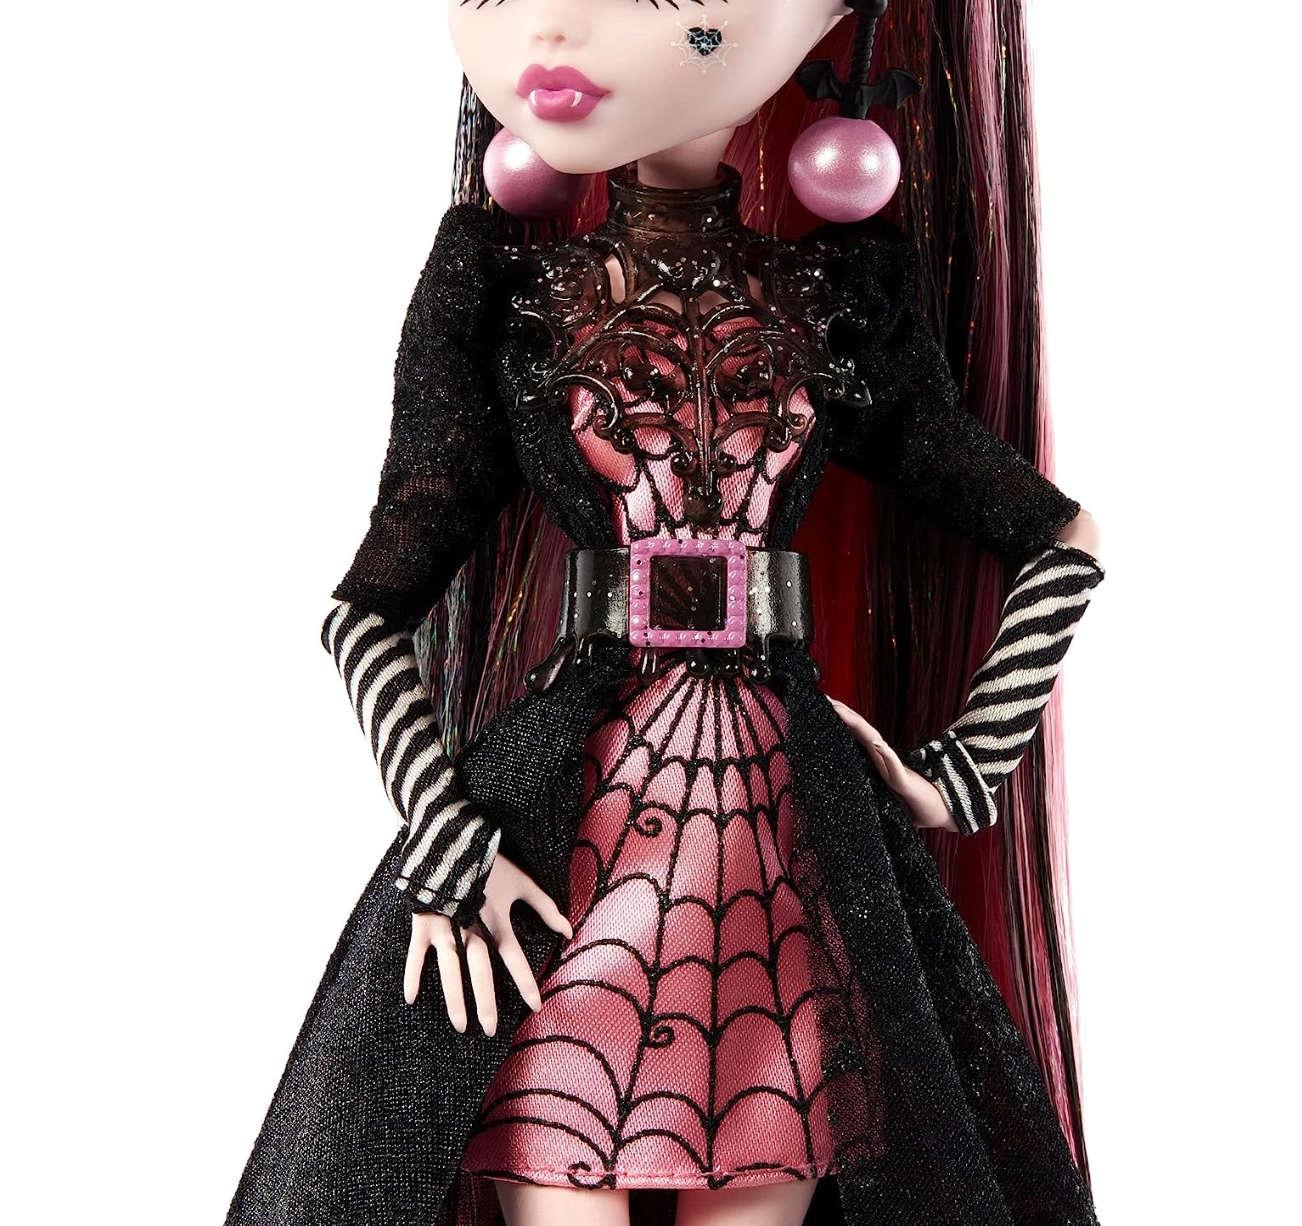 Monster High Draculaura Doll, Special Howliday Edition, Pink and Black Gown, High Fashion, Holiday Collection, Gifts for Girls and Boys